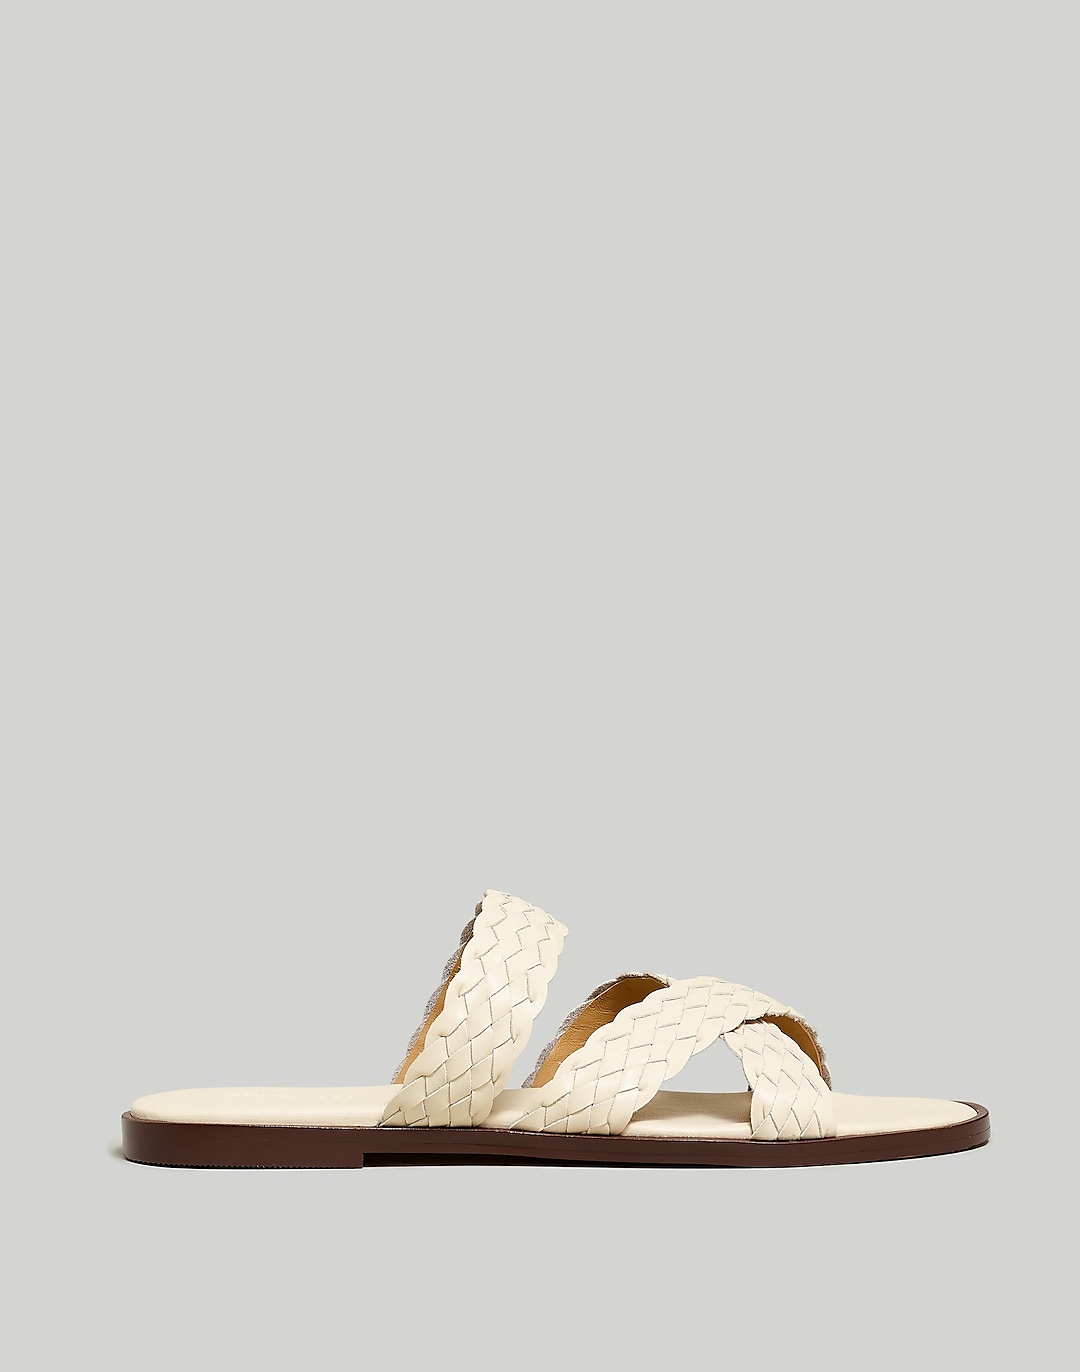 The Mena Slide Sandal in Woven Leather | Madewell